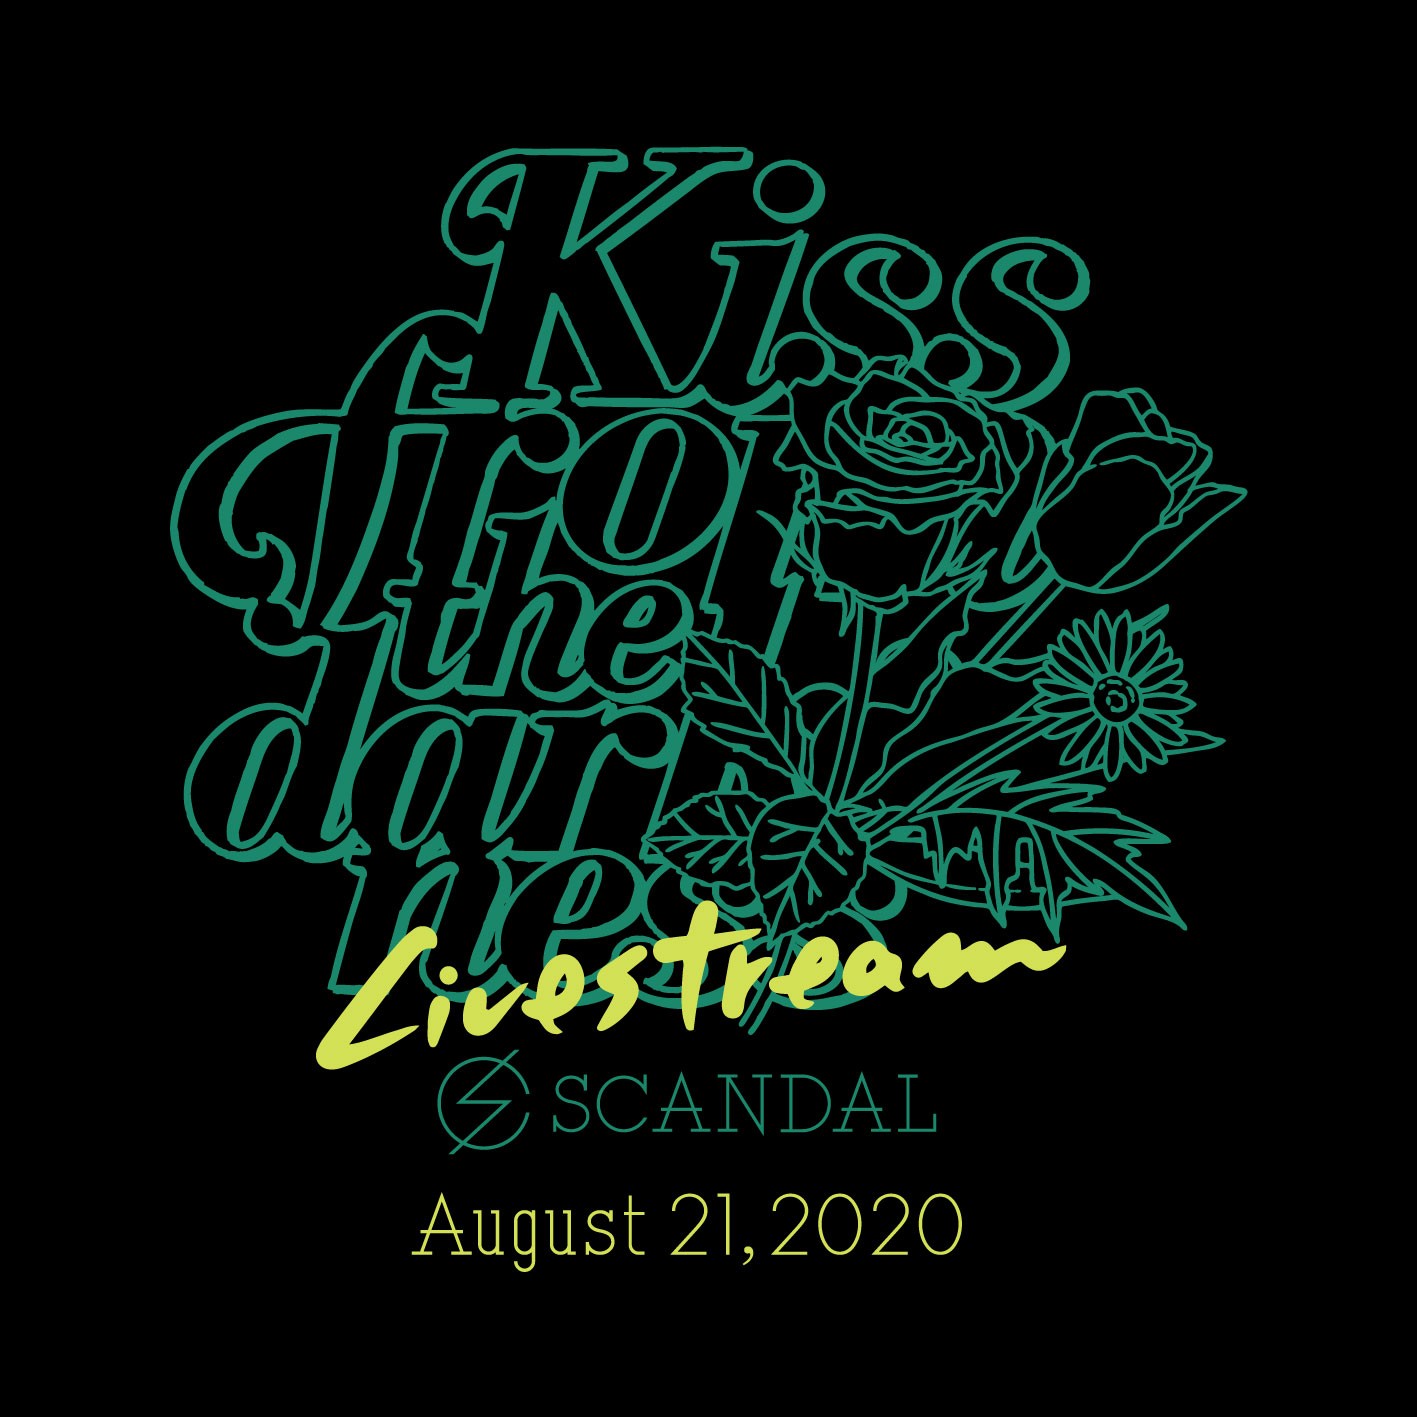 SCANDAL – SCANDAL WORLD TOUR 2020 “Kiss from the darkness” Livestream – 2020.8.21 [MP4 1080p]